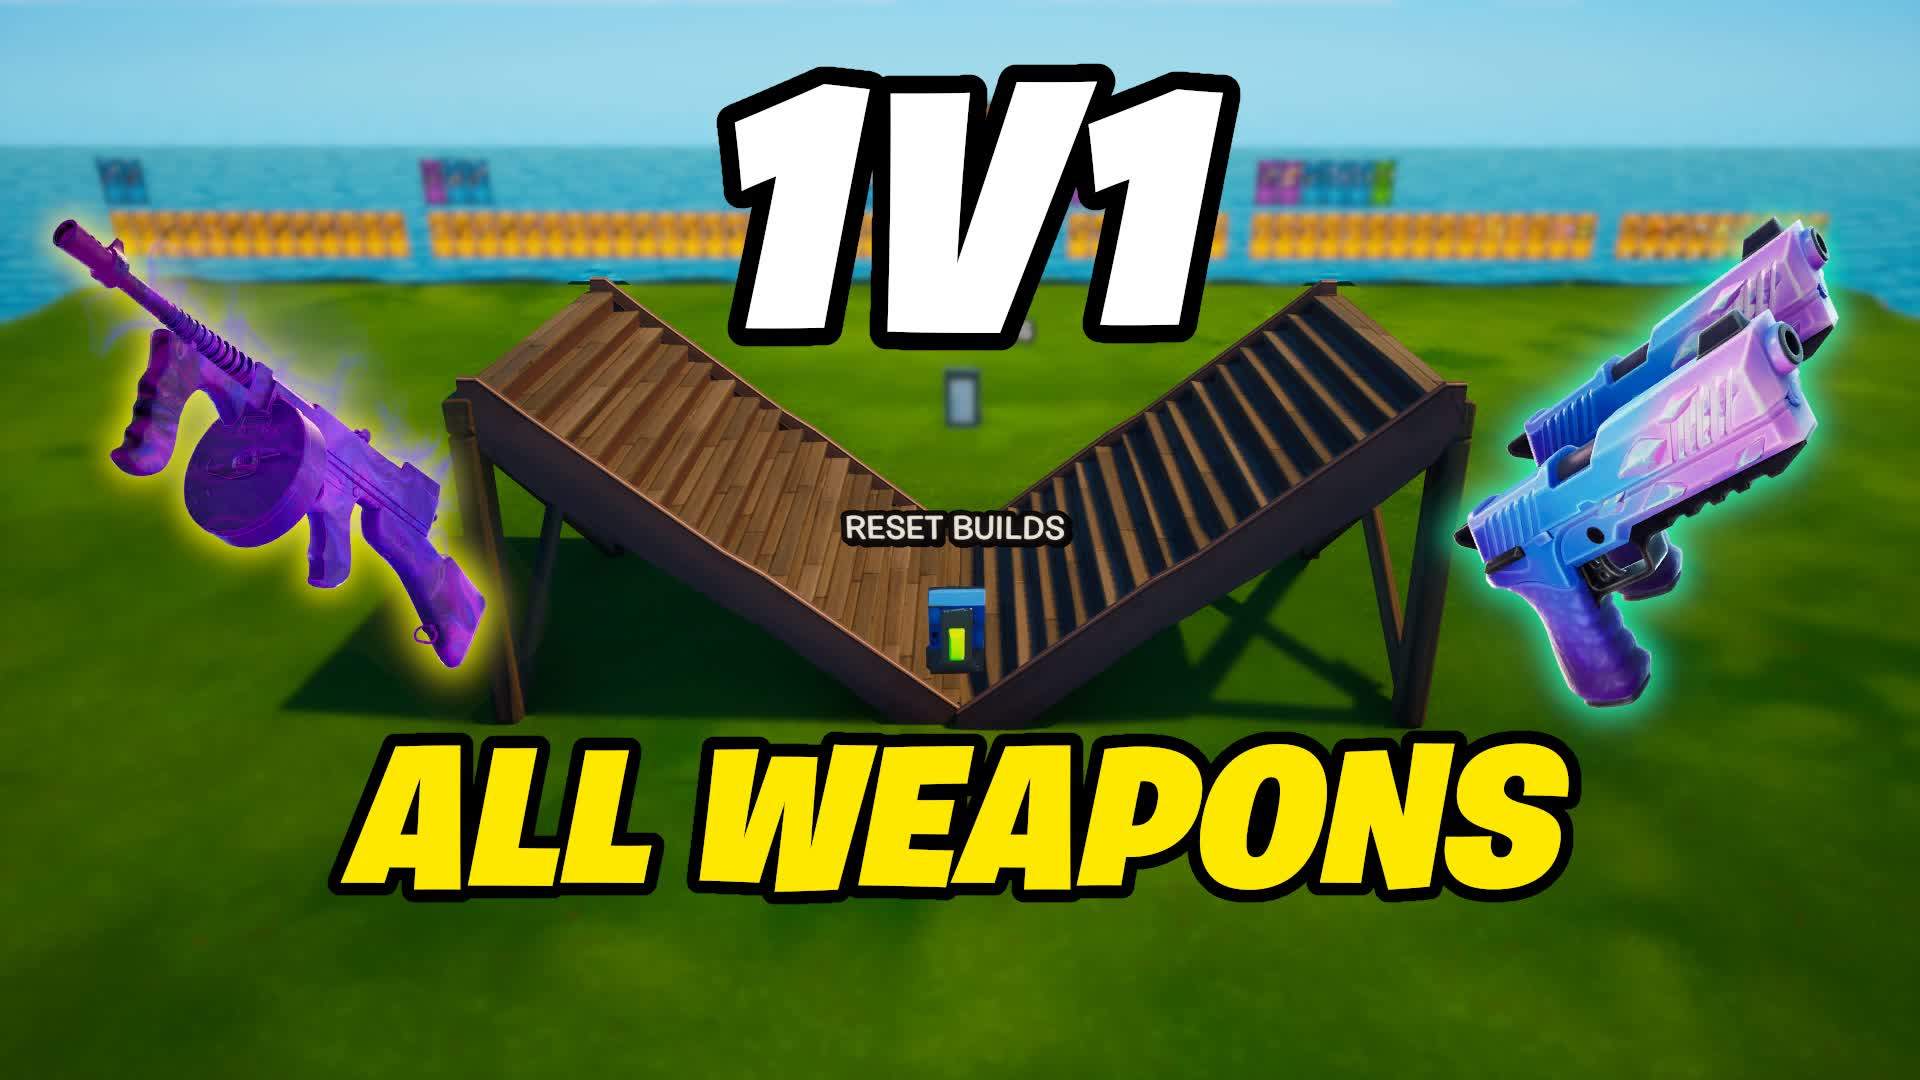 ❗ALL WEAPONS 1V1❗ 🌳GRASS🌳